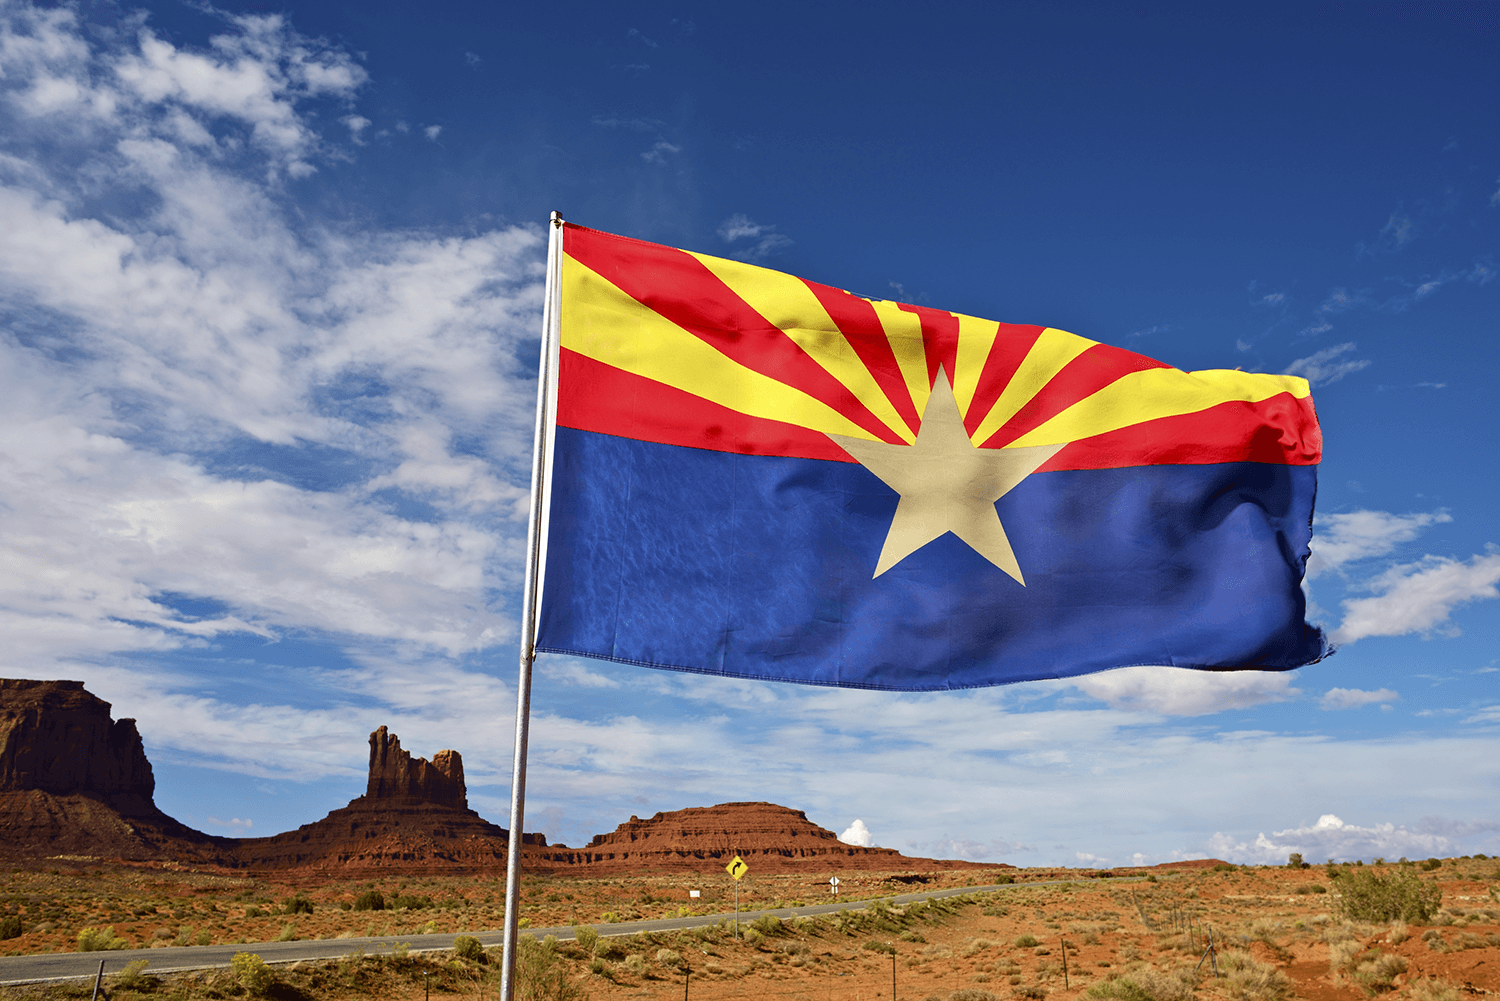 Arizona Voters Approve Measure to Nullify Some FDA Restrictions